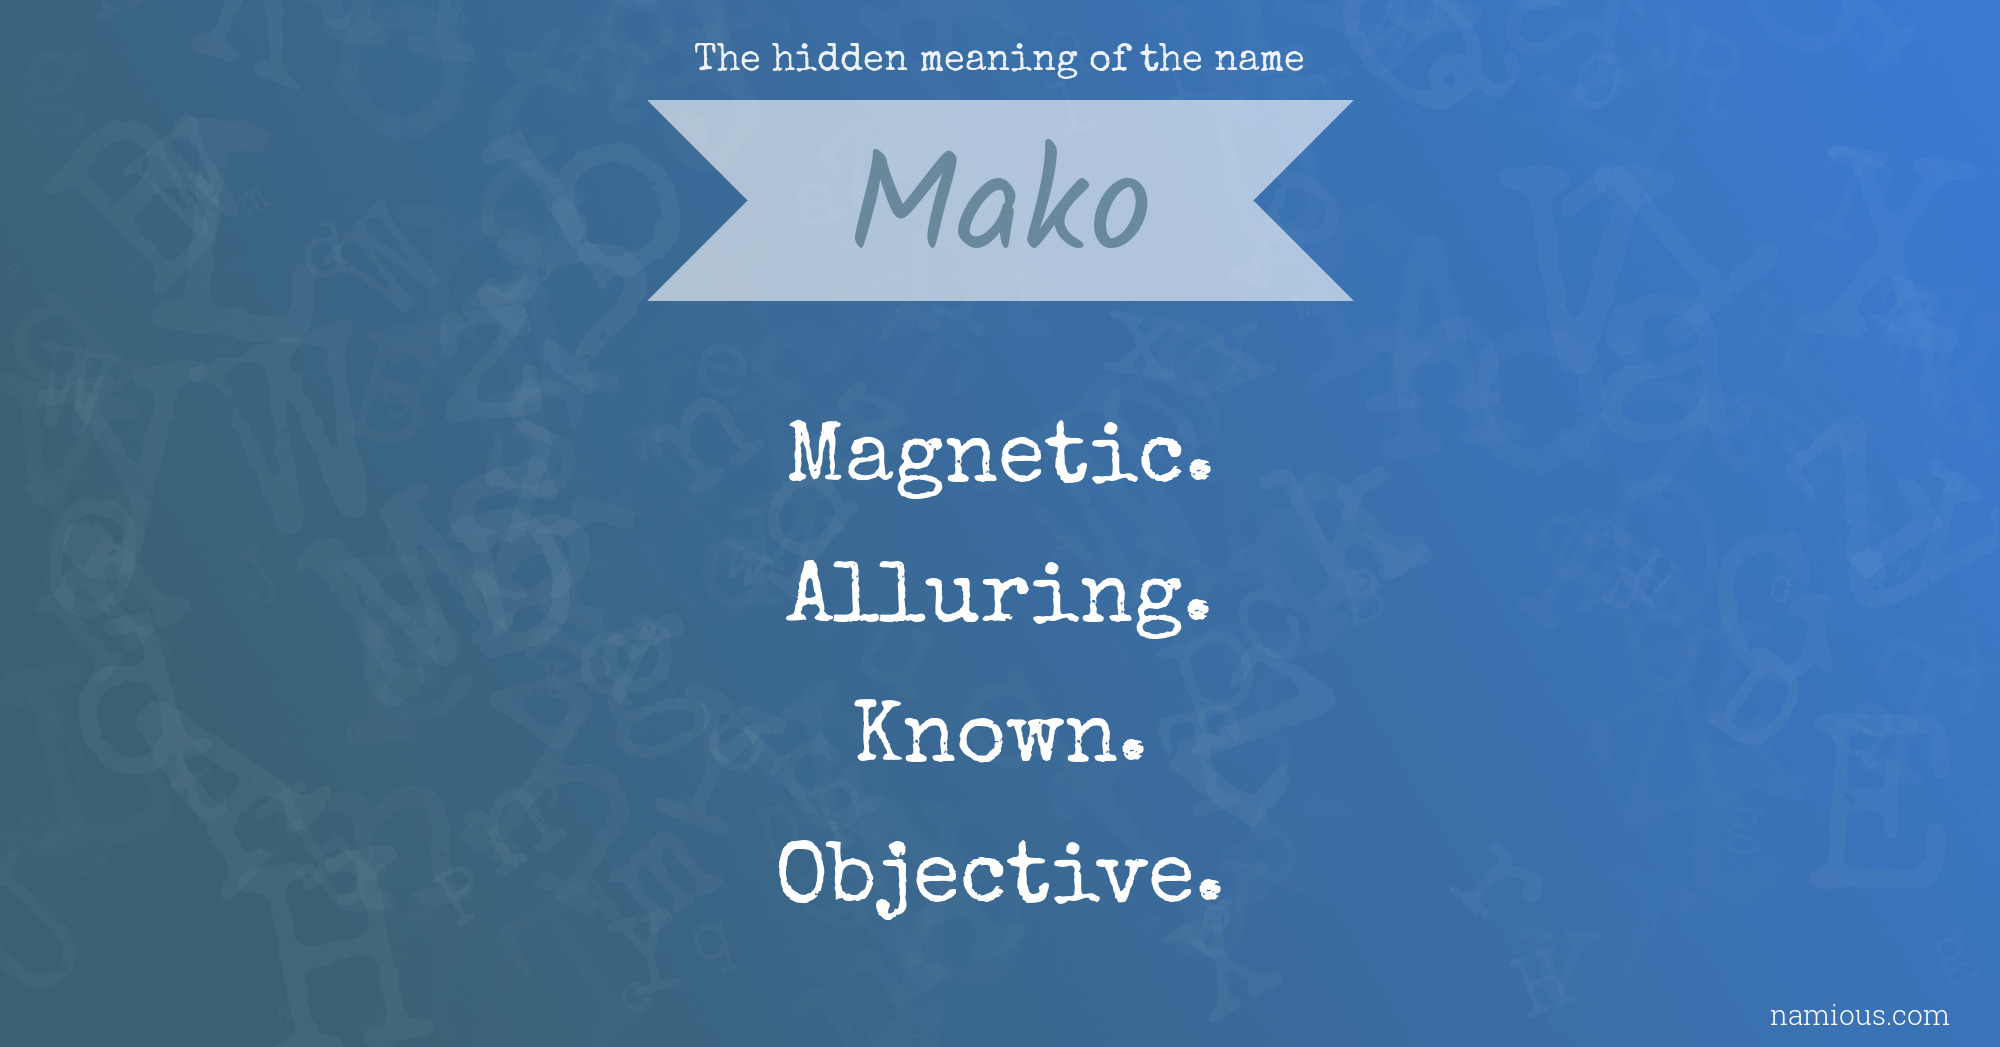 The hidden meaning of the name Mako